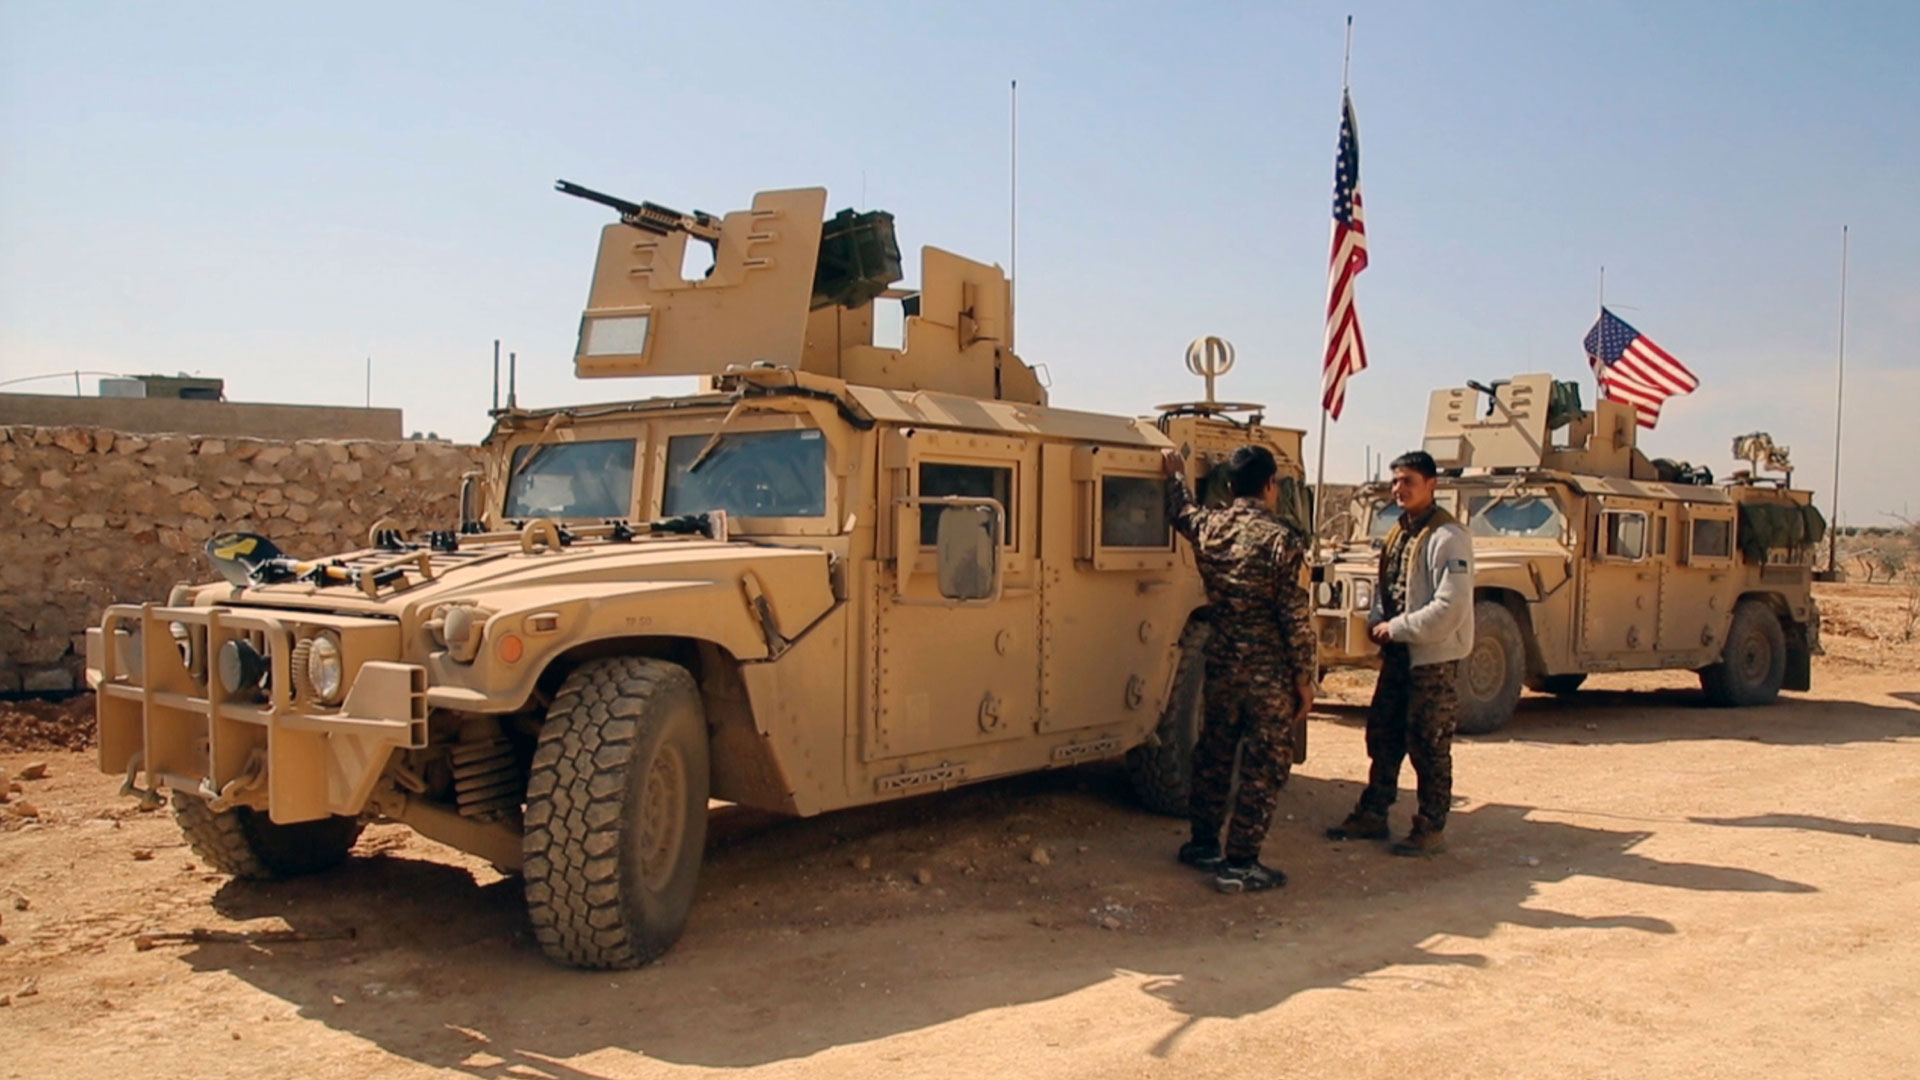 This is how much money the U.S. has spent to fight ISIL